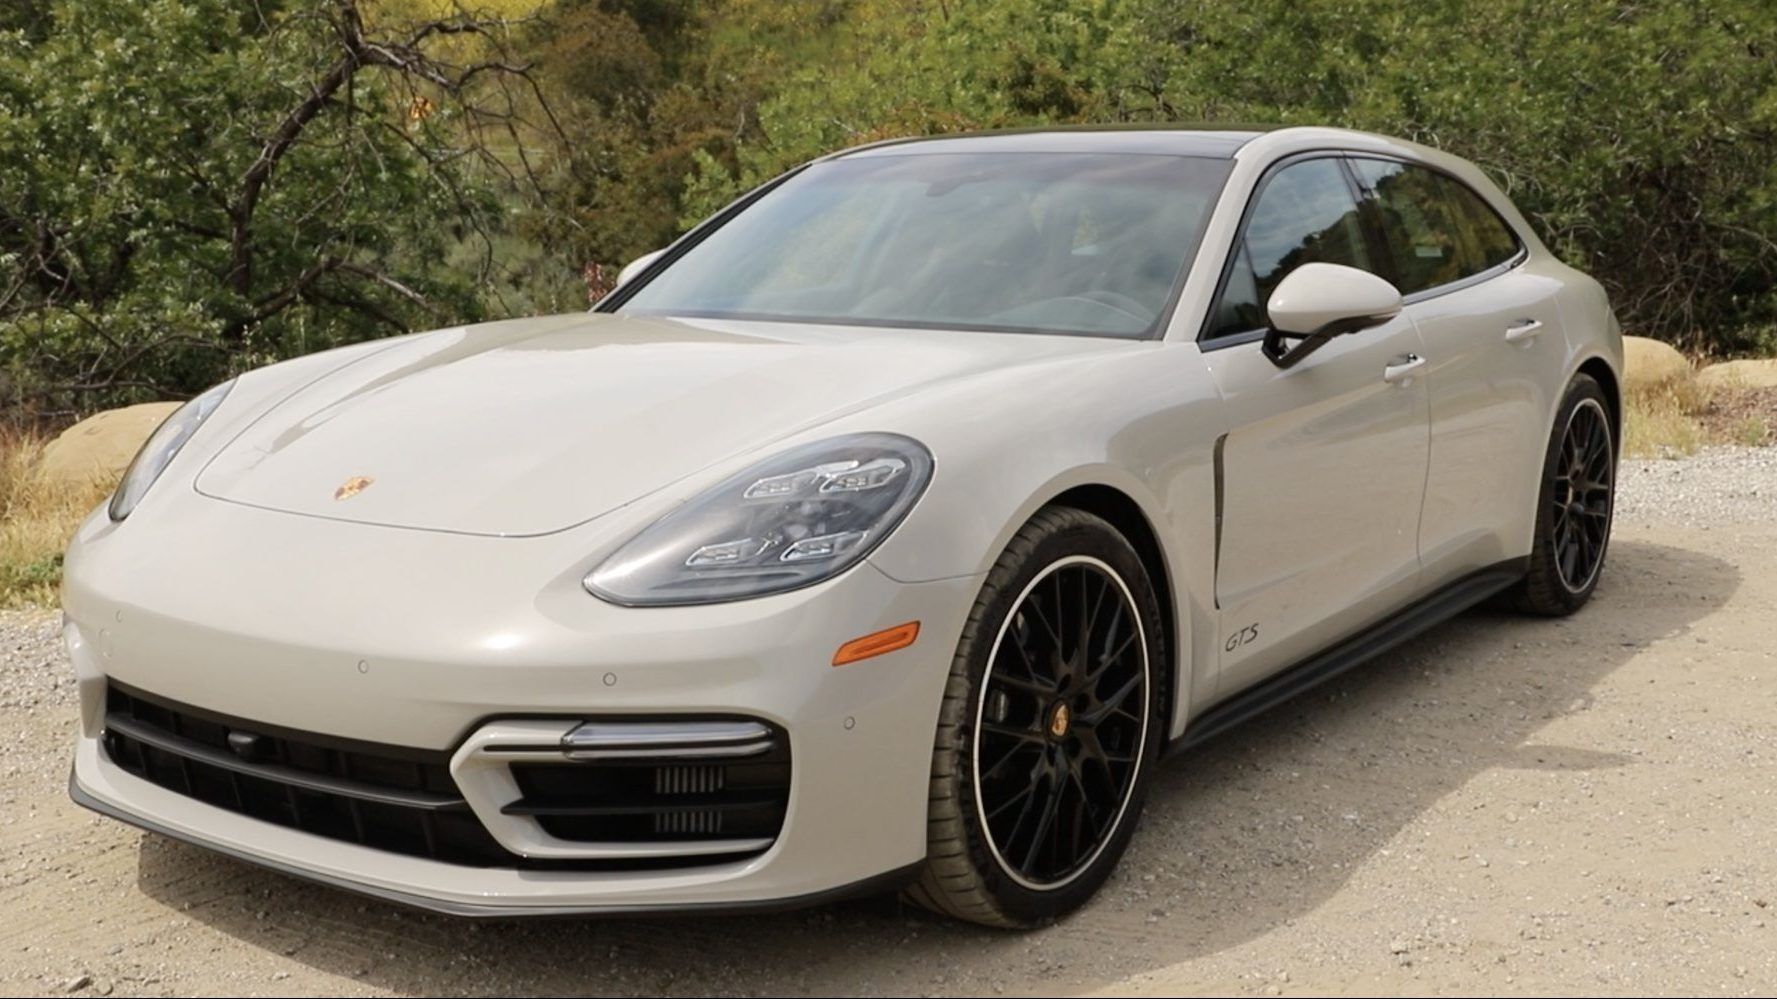 2023 Porsche Panamera - News, reviews, picture galleries and videos - The  Car Guide